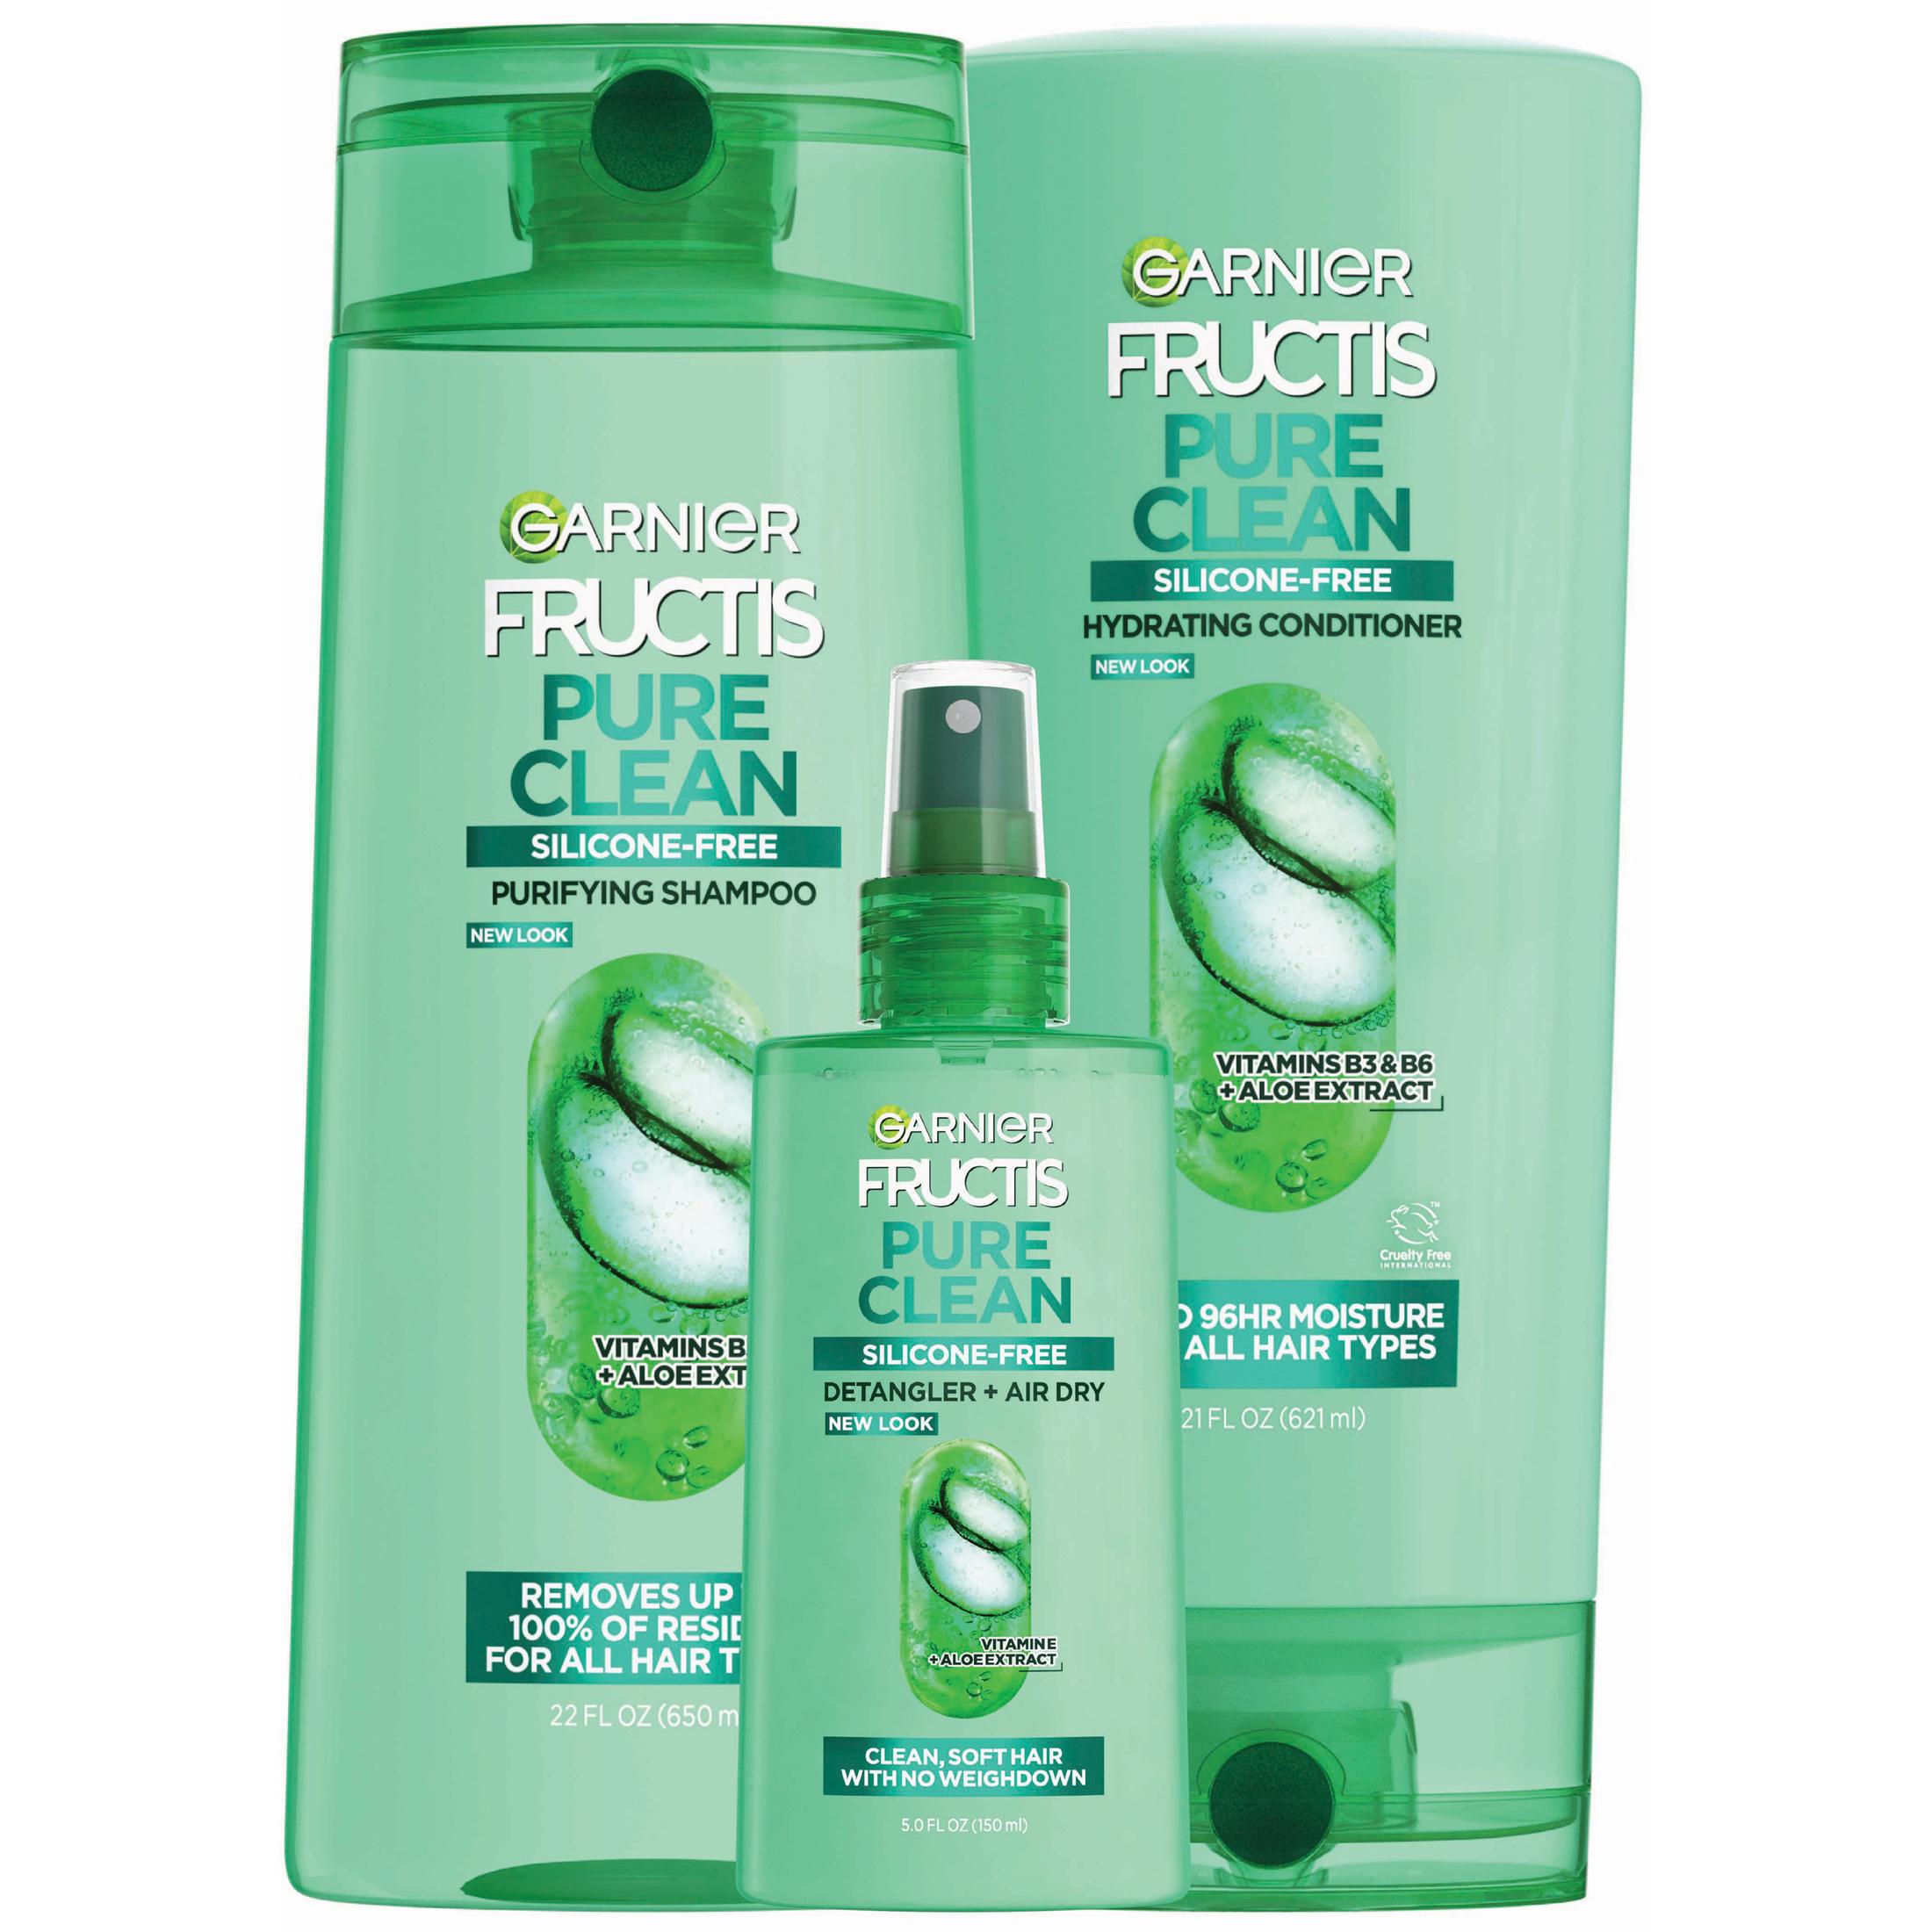 ($18 Value) Garnier Fructis Pure Clean Shampoo Conditioner and Treatment Gift Set, Holiday Kit - image 2 of 9